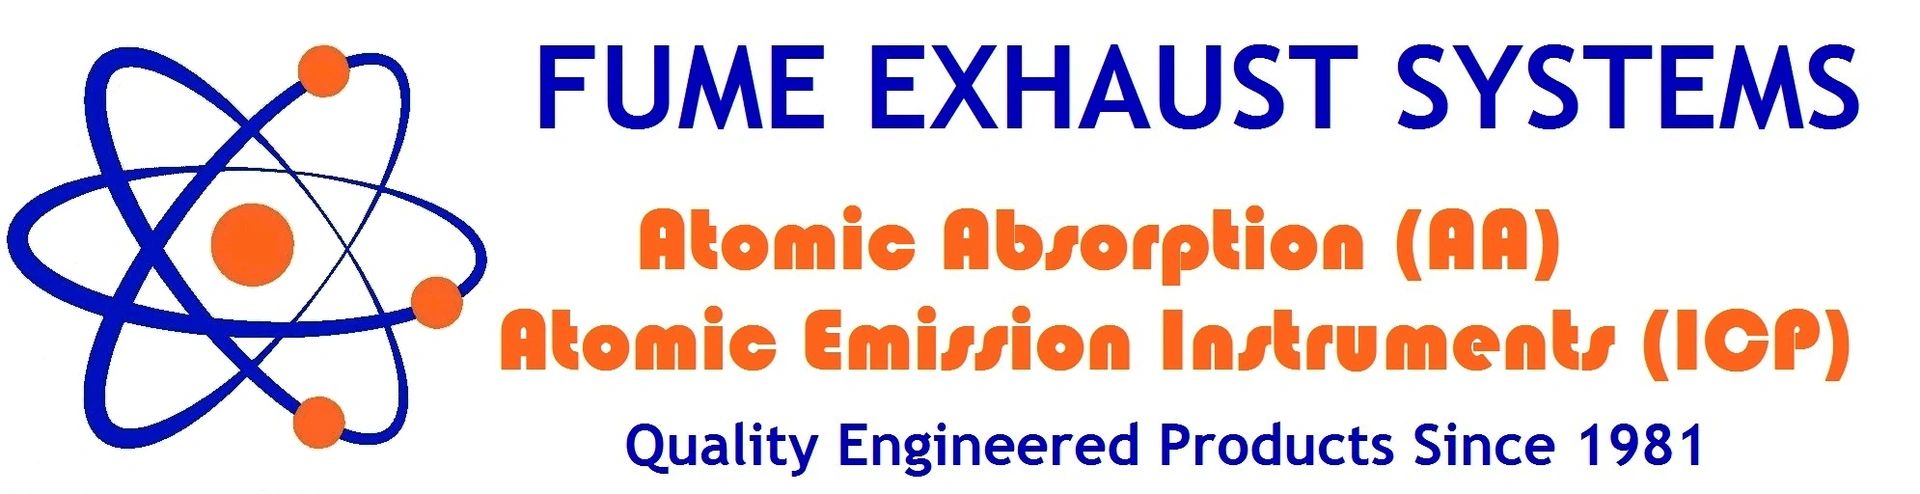 Mass Spectrometer Atomic Absorption (AA) and Atomic Emission (ICP) fume exhaust systems